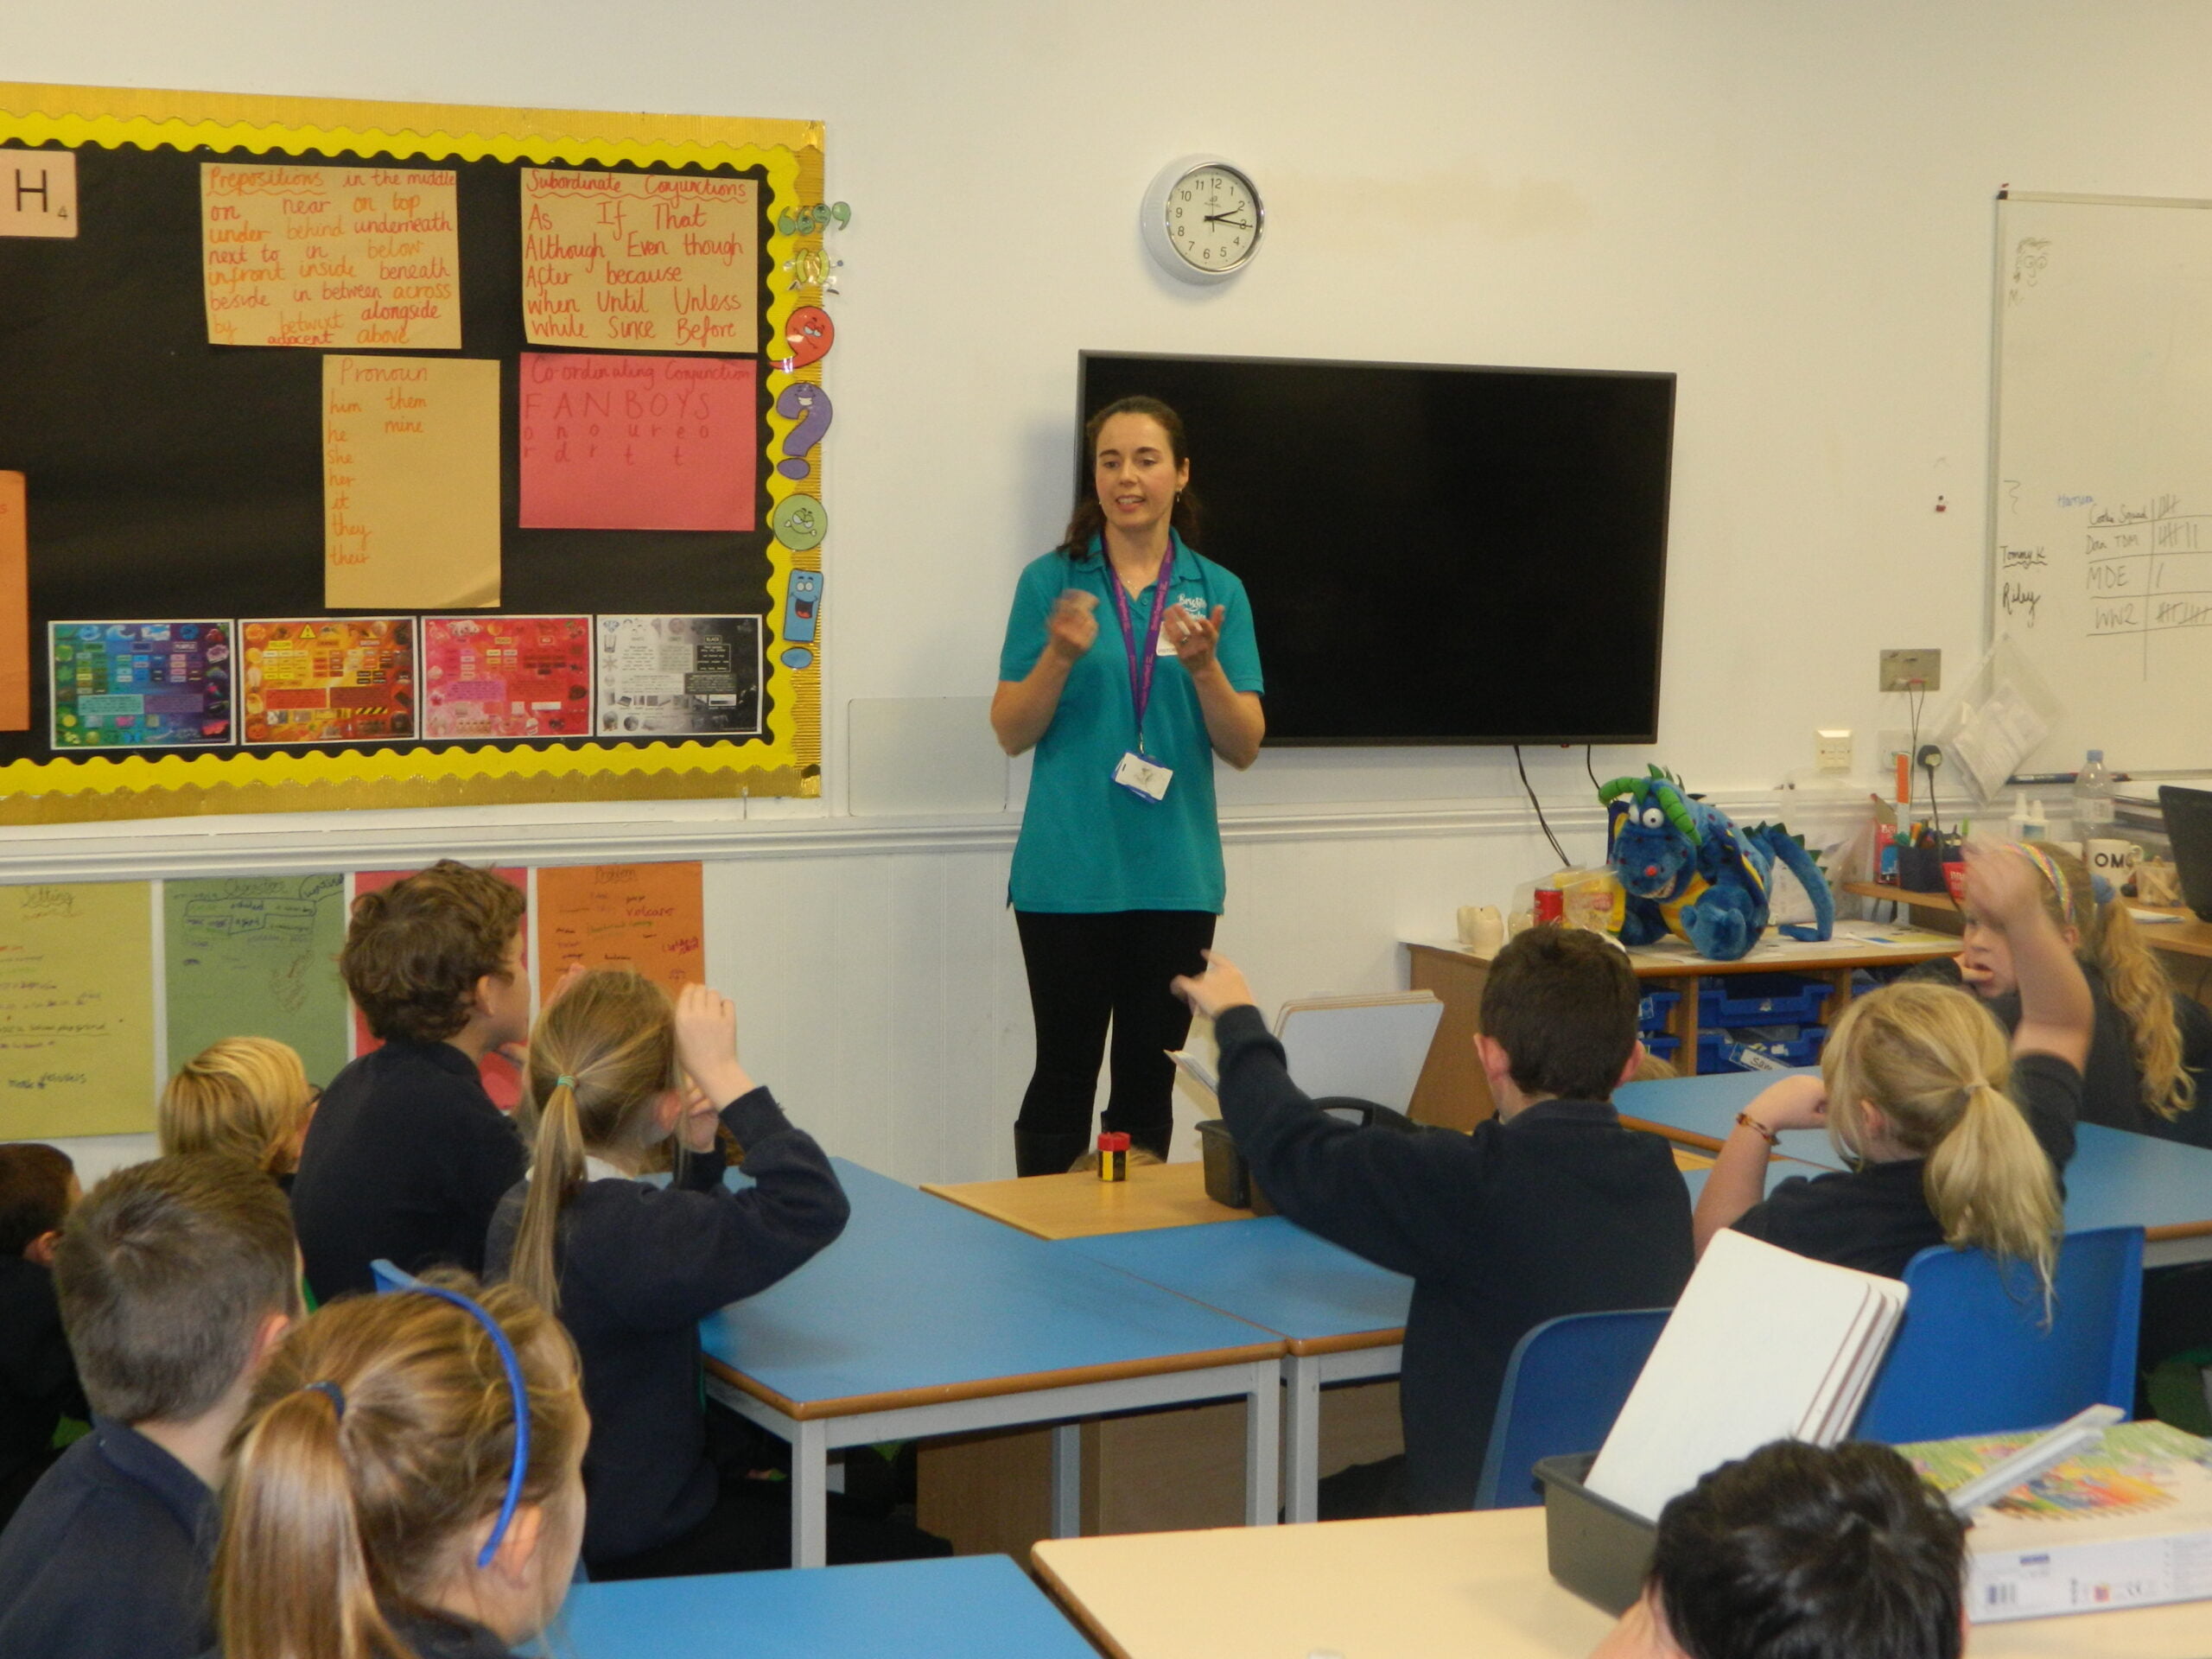 Brighter Smiles dental nurse Jo talking to children in classroom about oral health